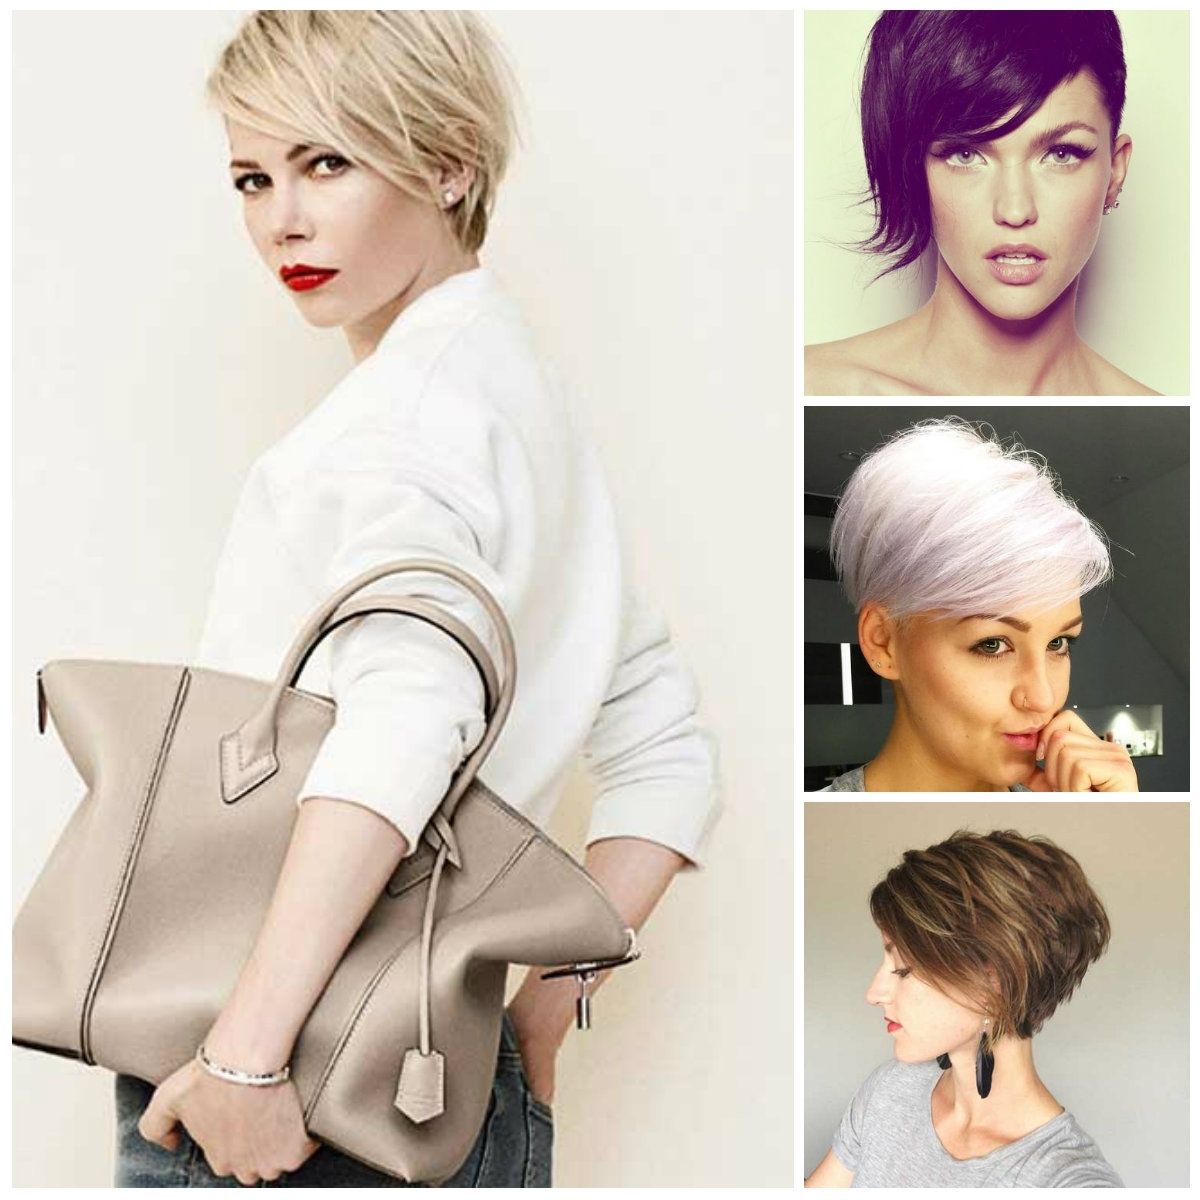 Long Pixie Haircuts | 2017 Haircuts, Hairstyles And Hair Colors In Newest Short Pixie Hairstyles With Long Bangs (View 15 of 15)